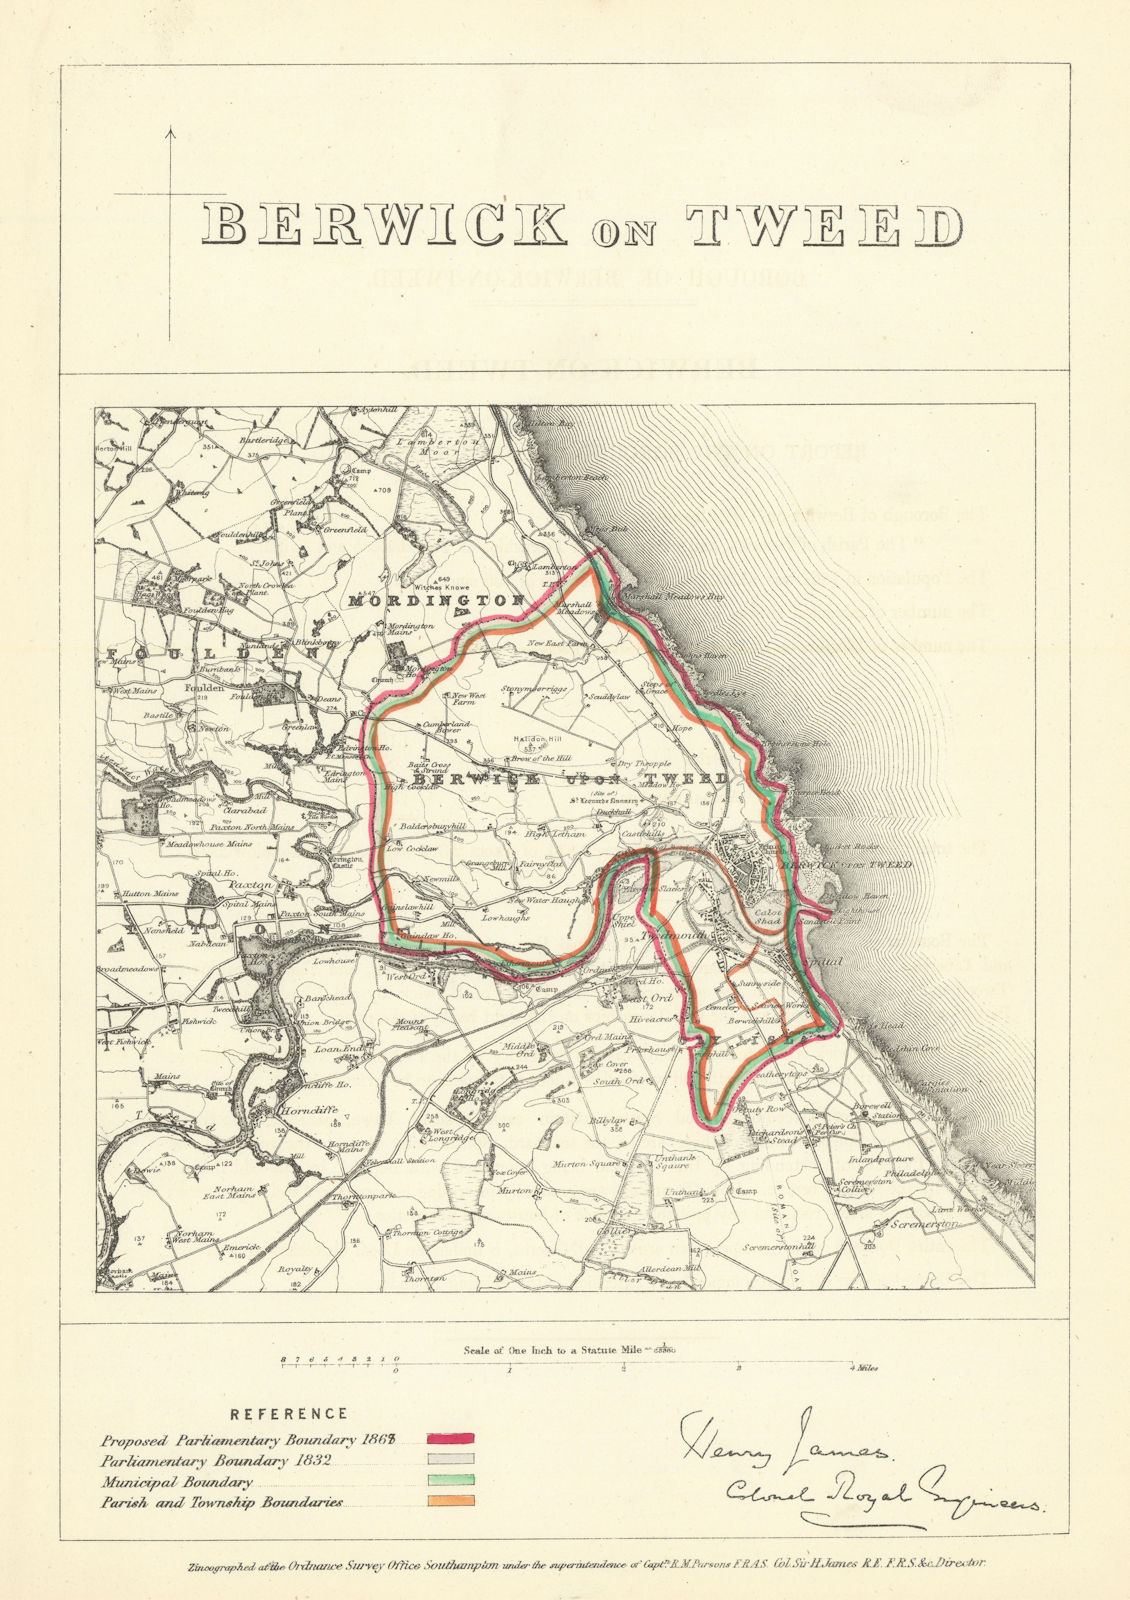 Berwick-upon-Tweed, Northumbs. JAMES. Parliamentary Boundary Commission 1868 map